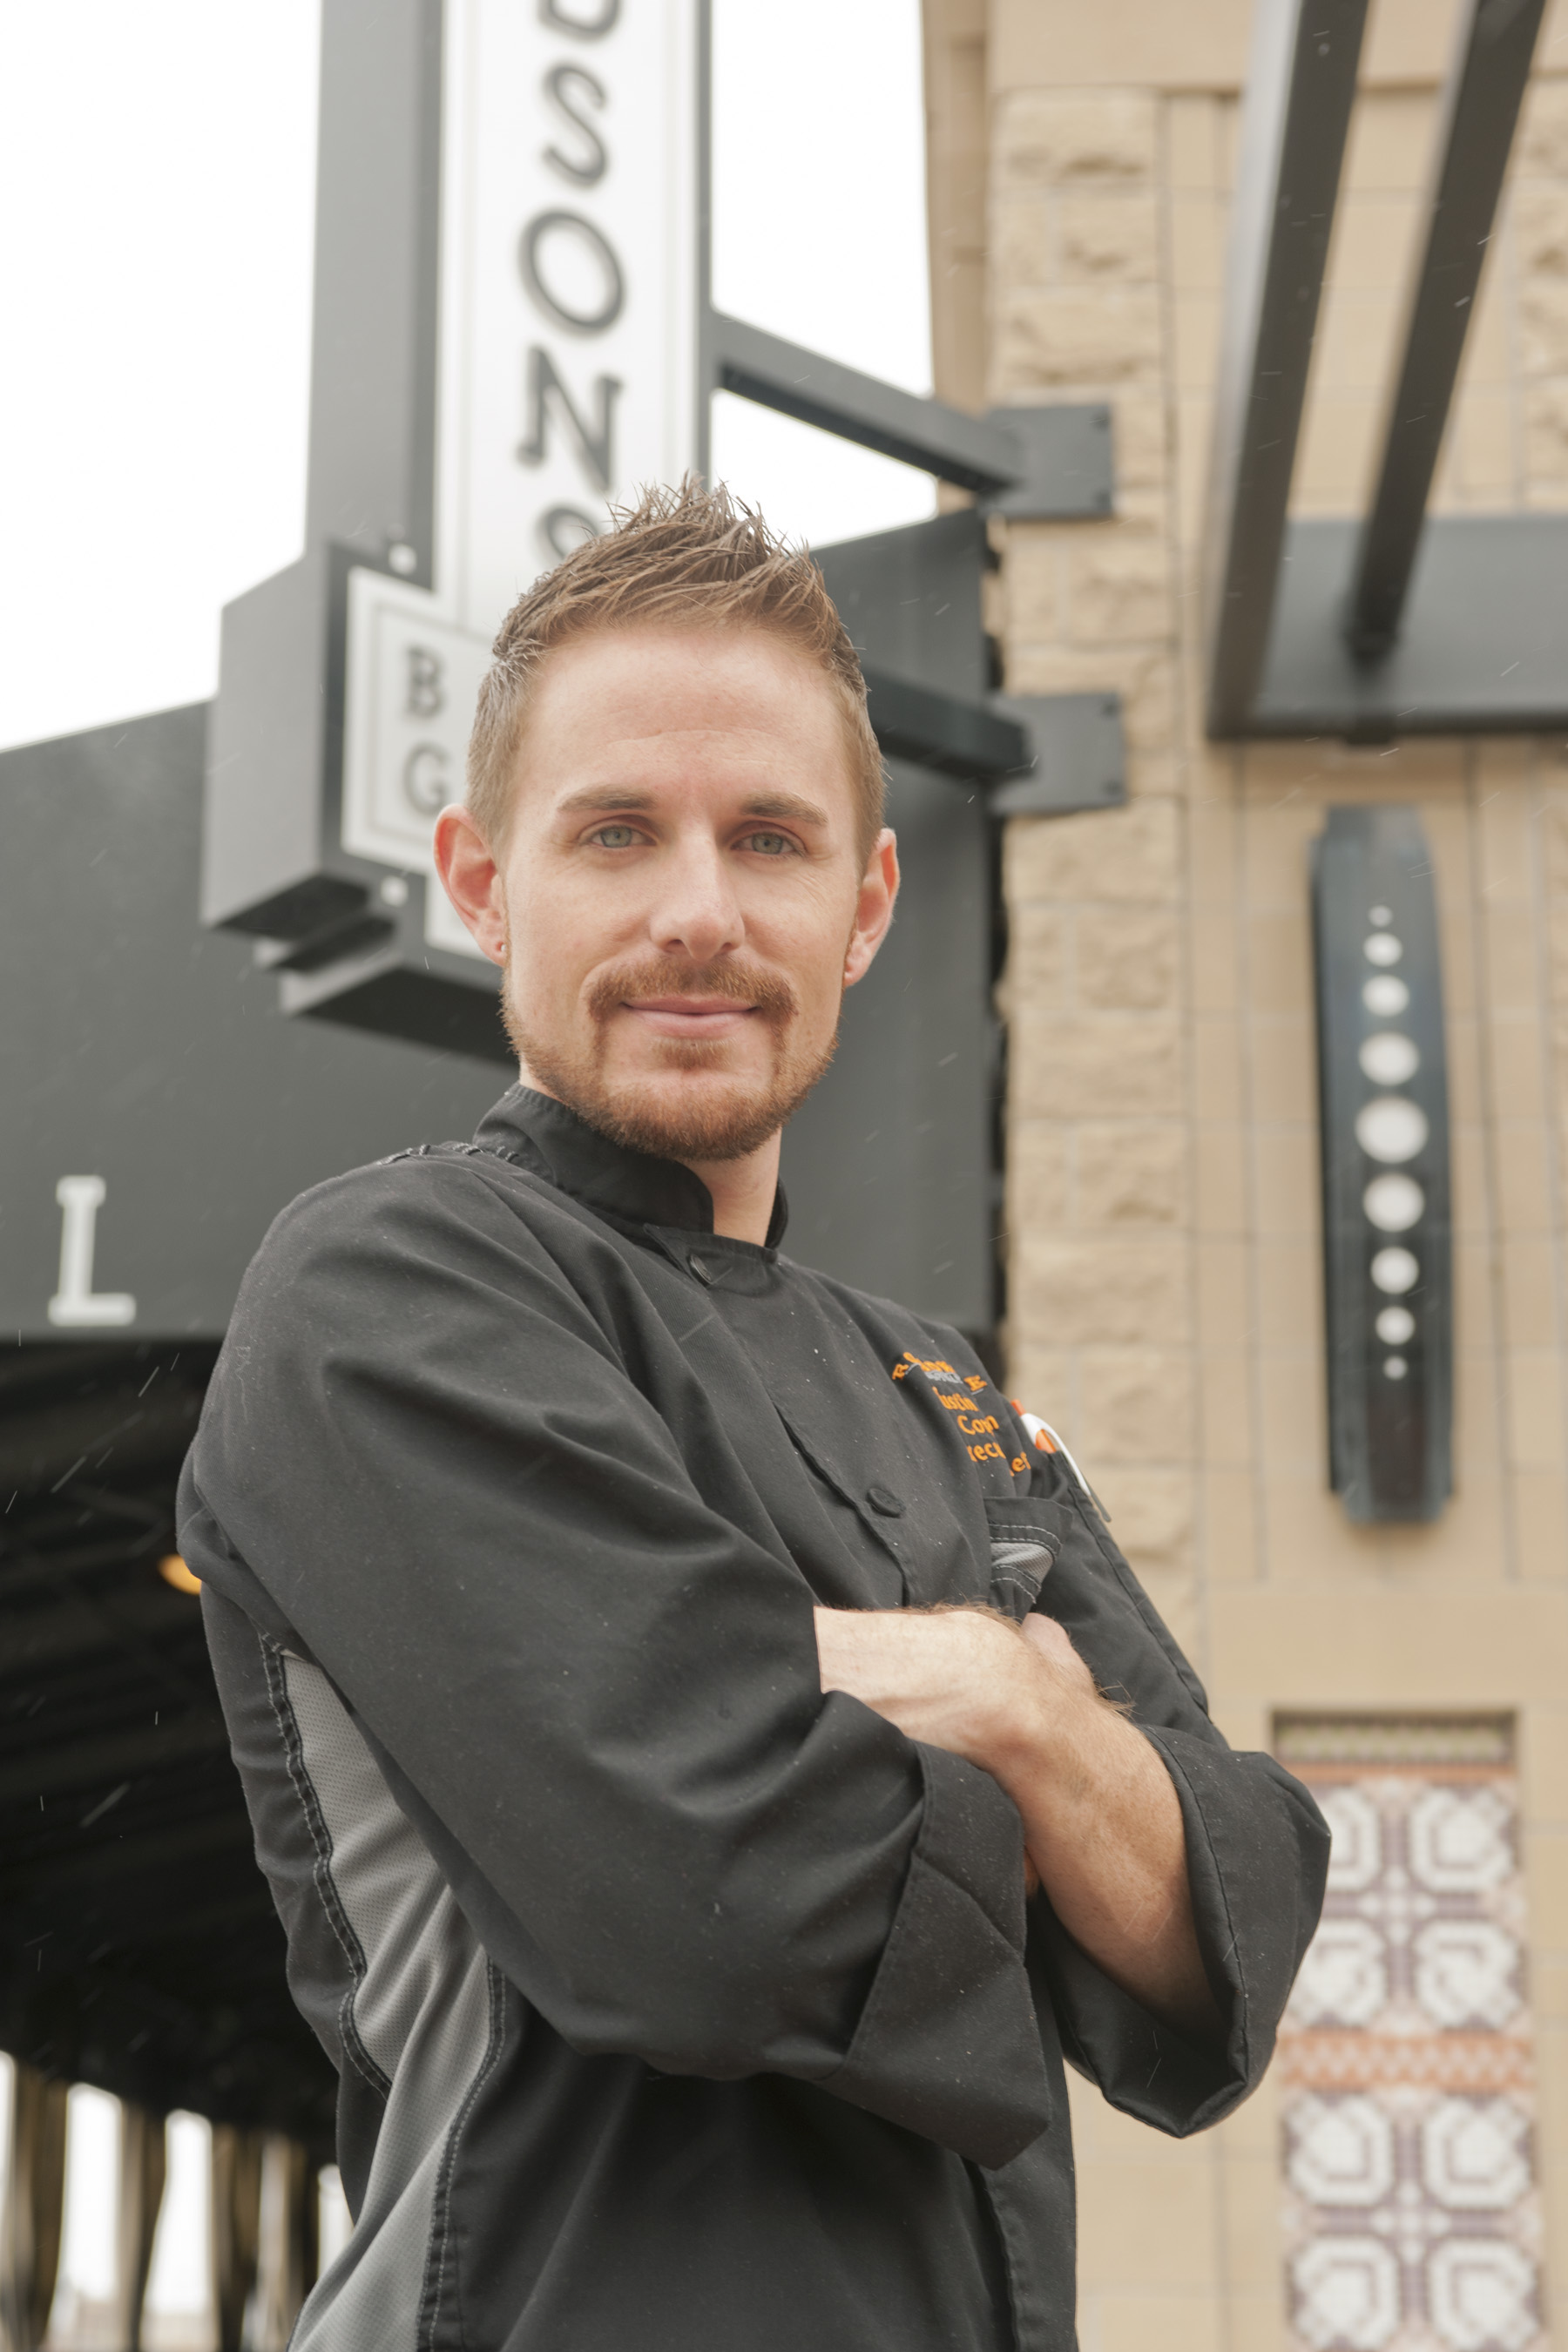 Executive Chef Justin Adrian has created dueling dinners for Hodsons SouthGlenn’s Thanksgiving celebration, offering a choice for traditionalists versus the more gastronomically adventurous.